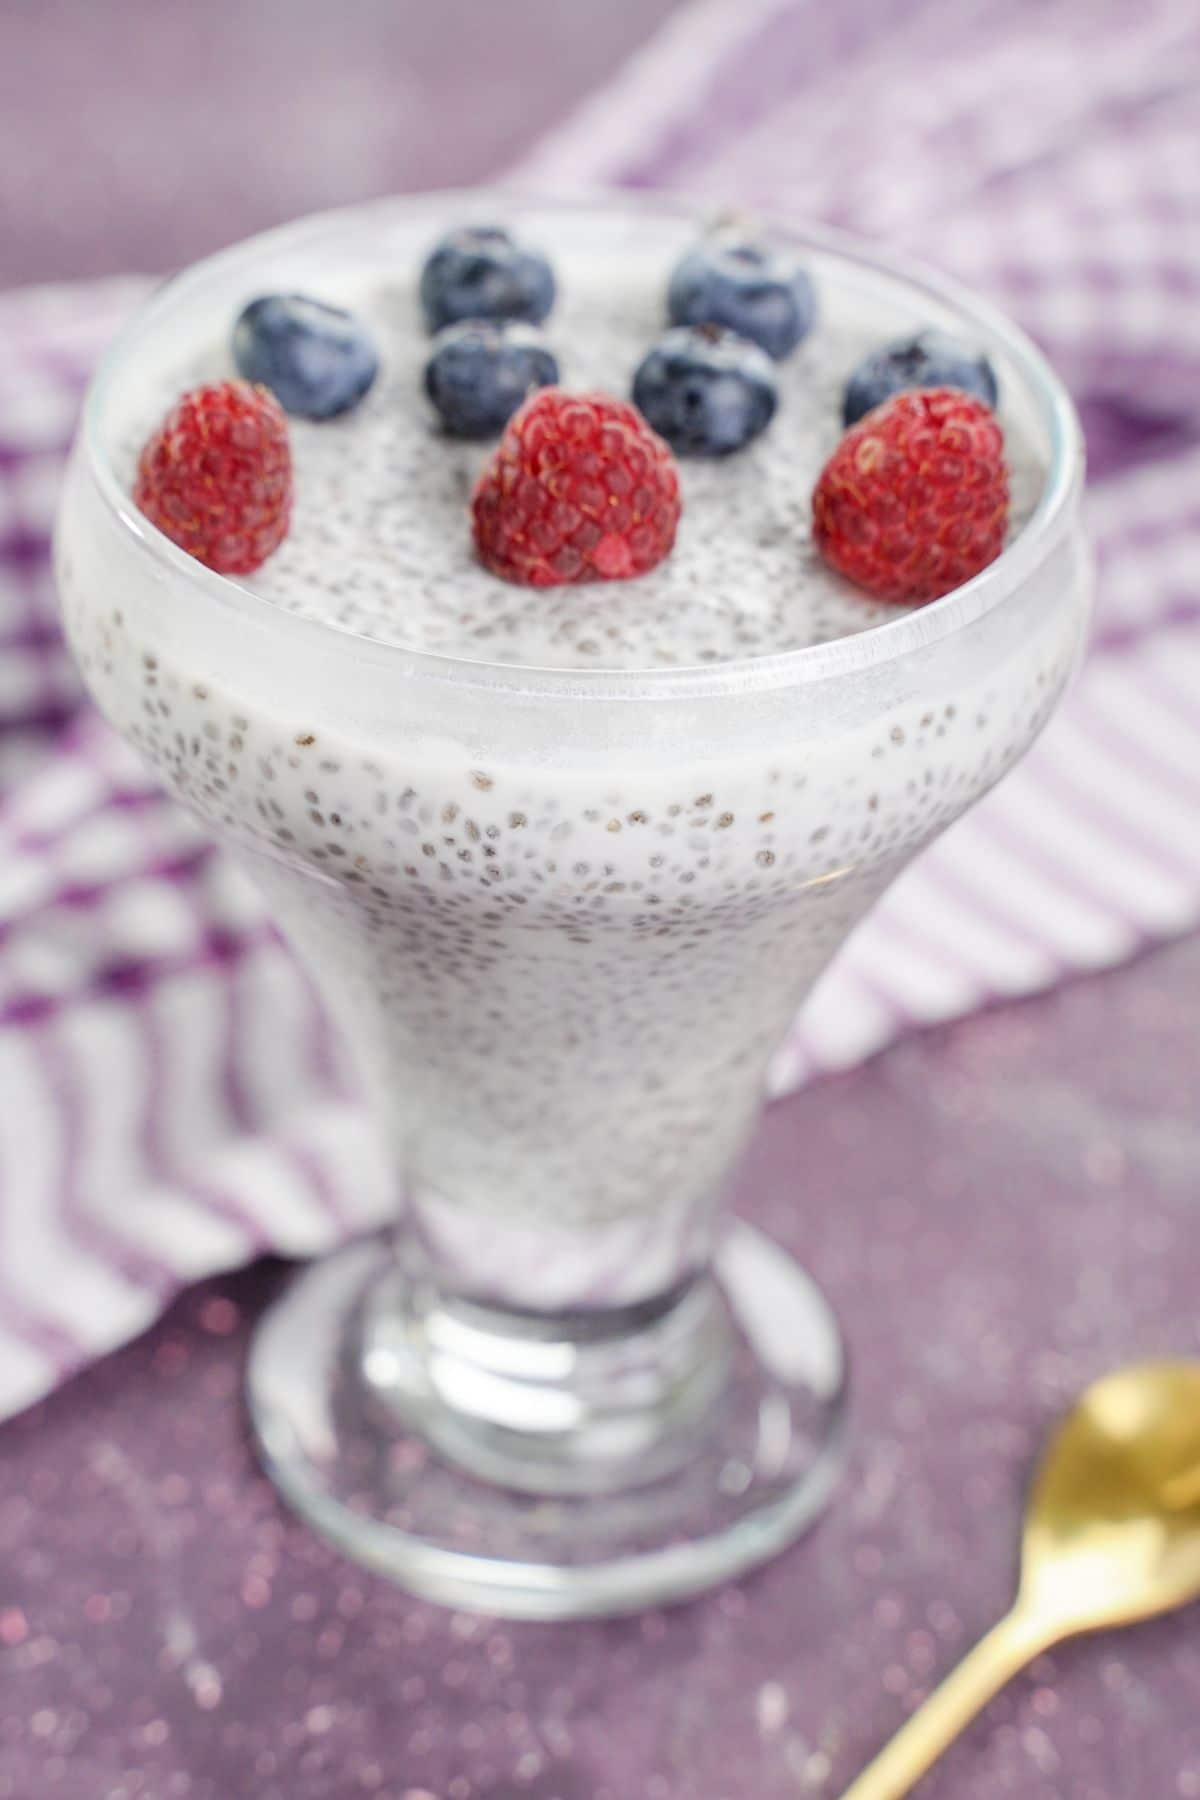 no-bake chai pudding topped with blueberries and raspberries in a glass